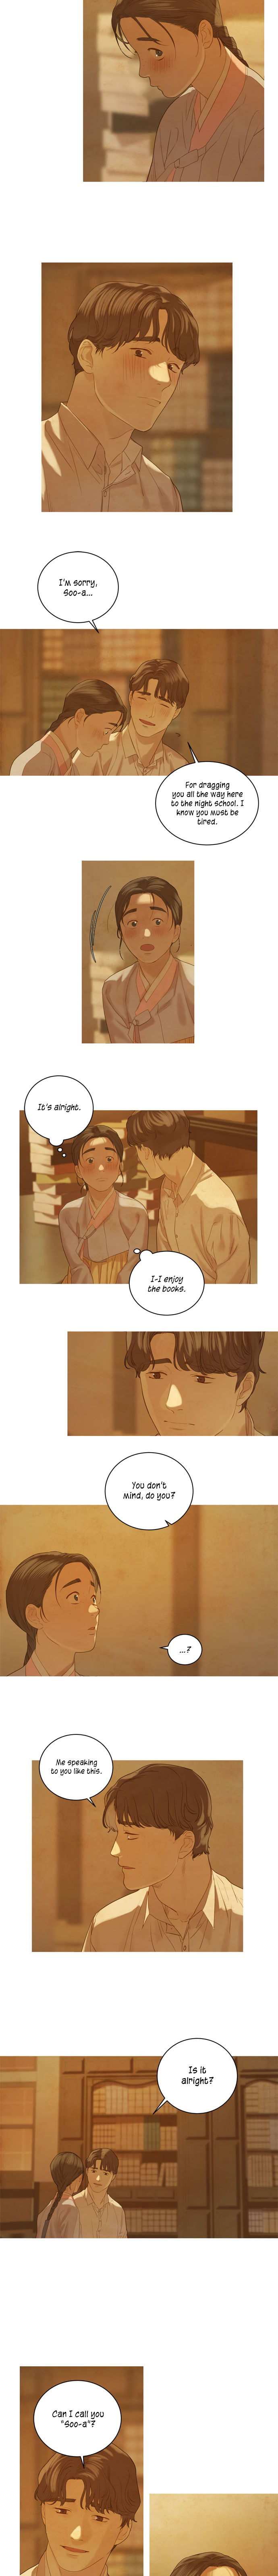 Gorae Byul - The Gyeongseong Mermaid - Chapter 39 Page 8